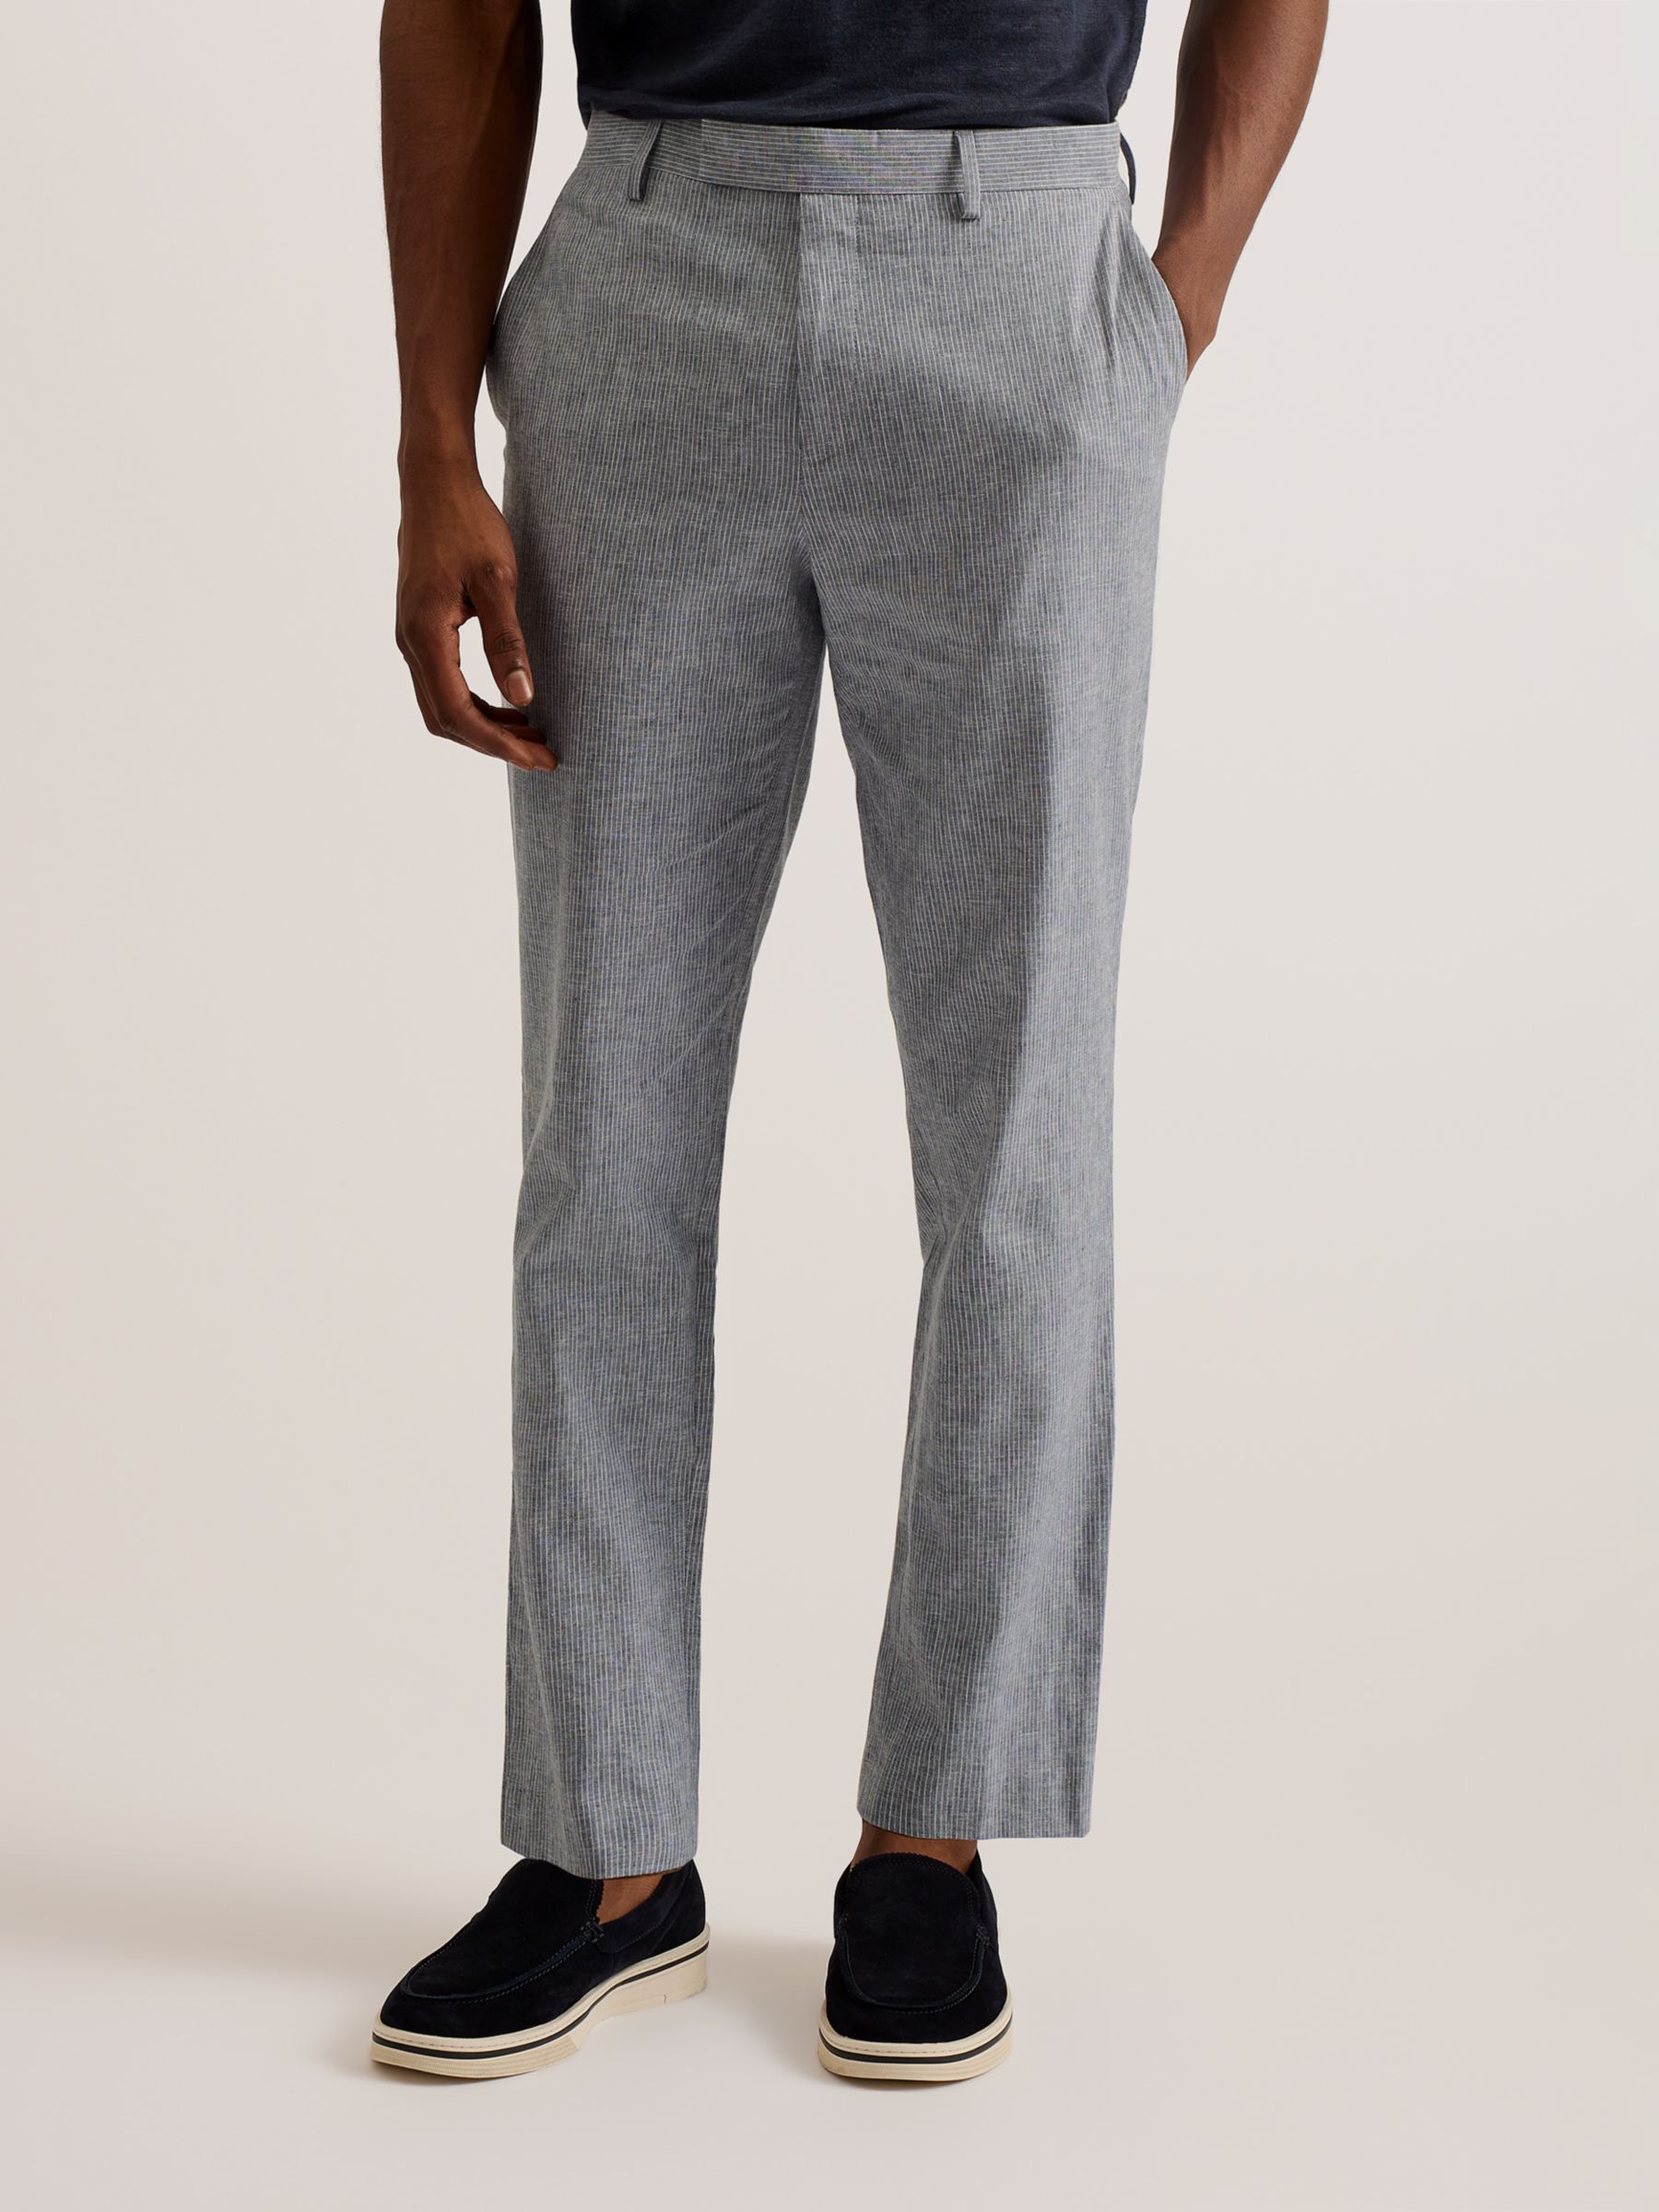 Ted Baker Pinstripe Slim Tailored Trousers, Light Grey, 28R